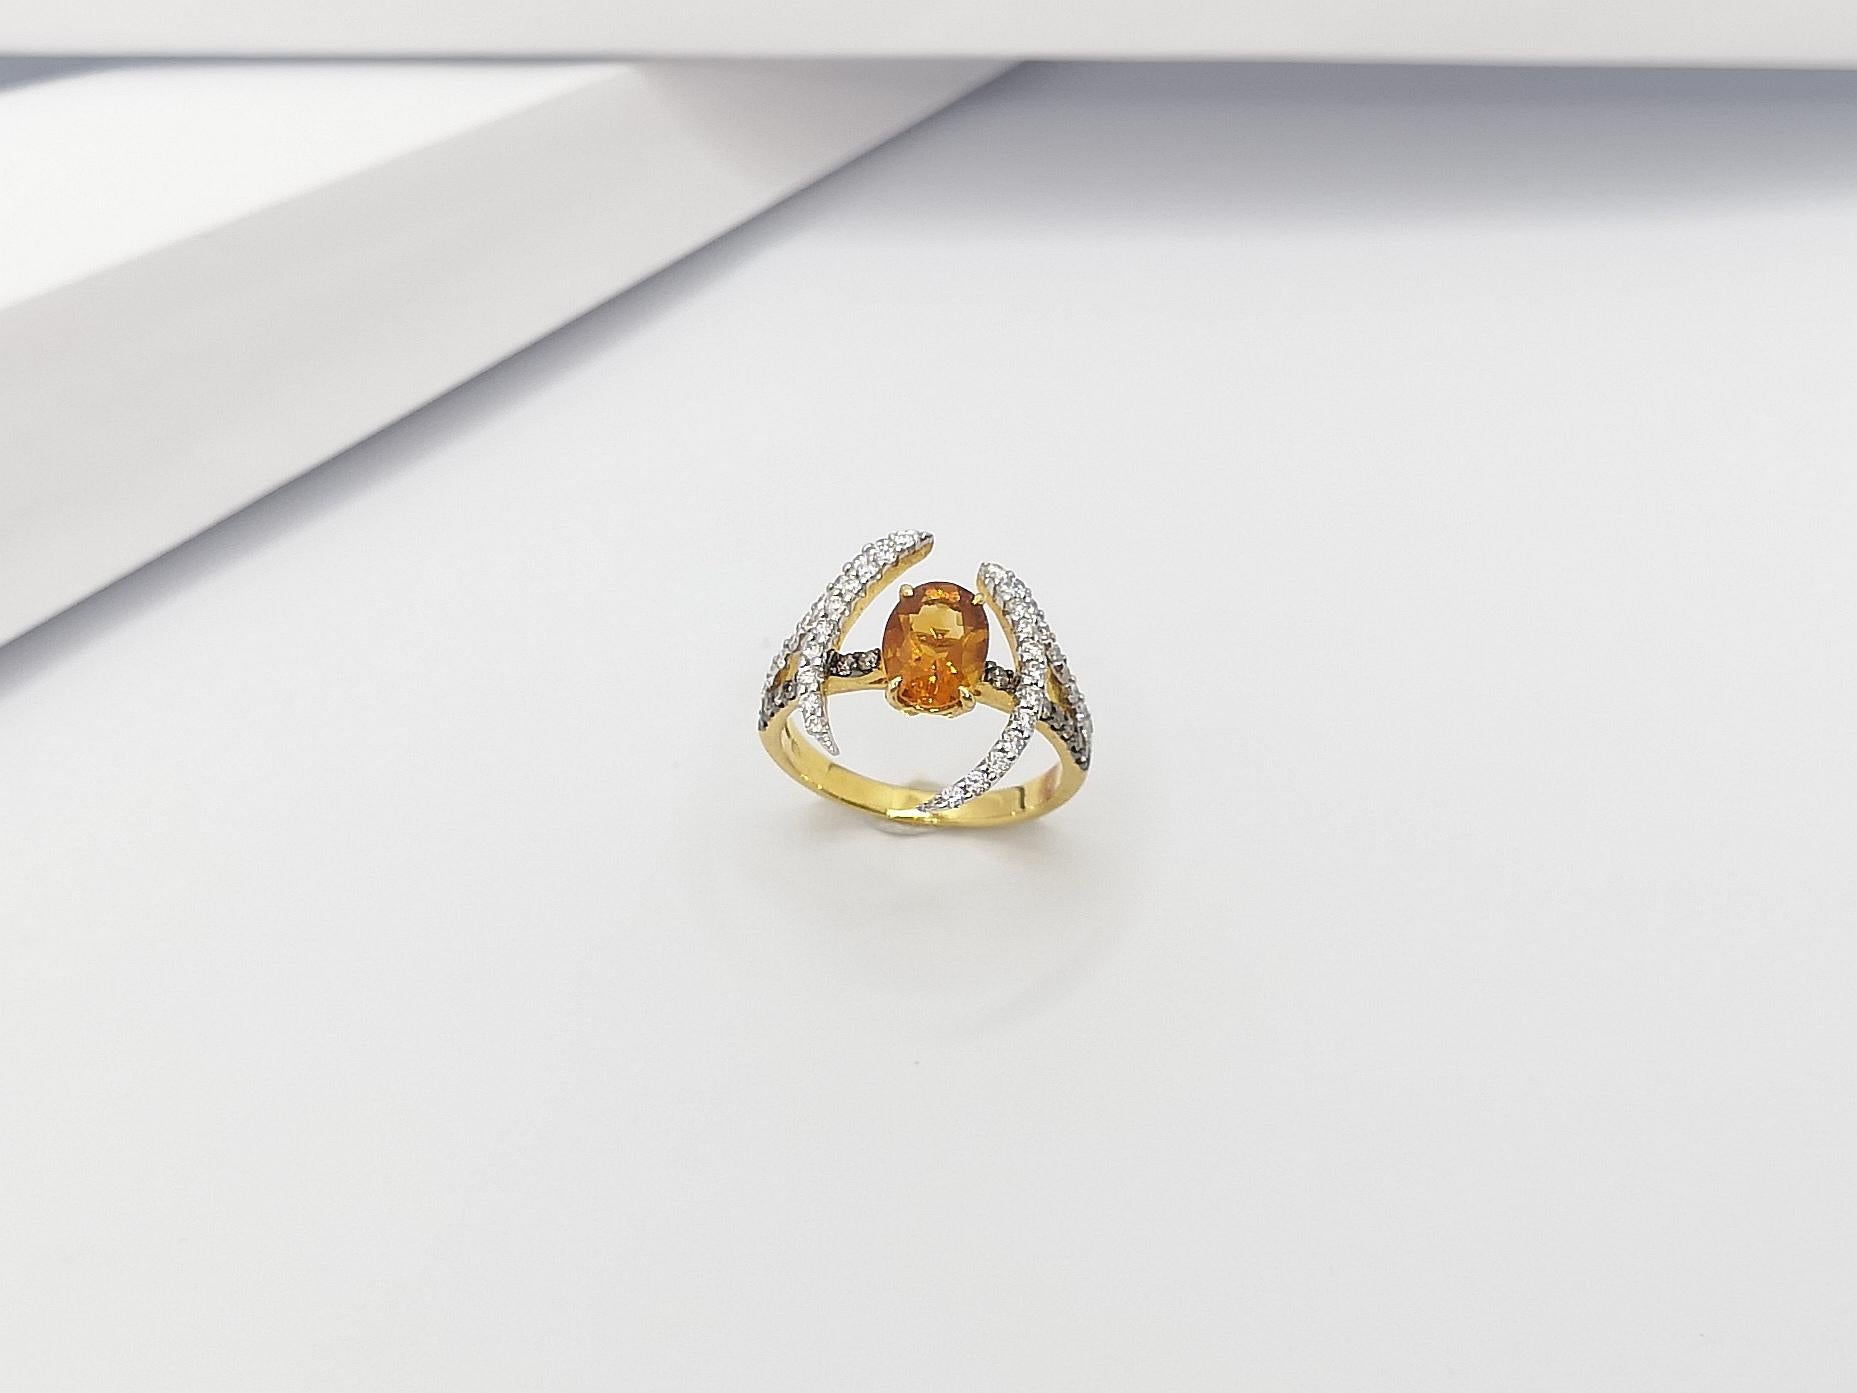 Citrine, Brown Diamond and Diamond Ring Set in 18k Gold by Kavant & Sharart 9